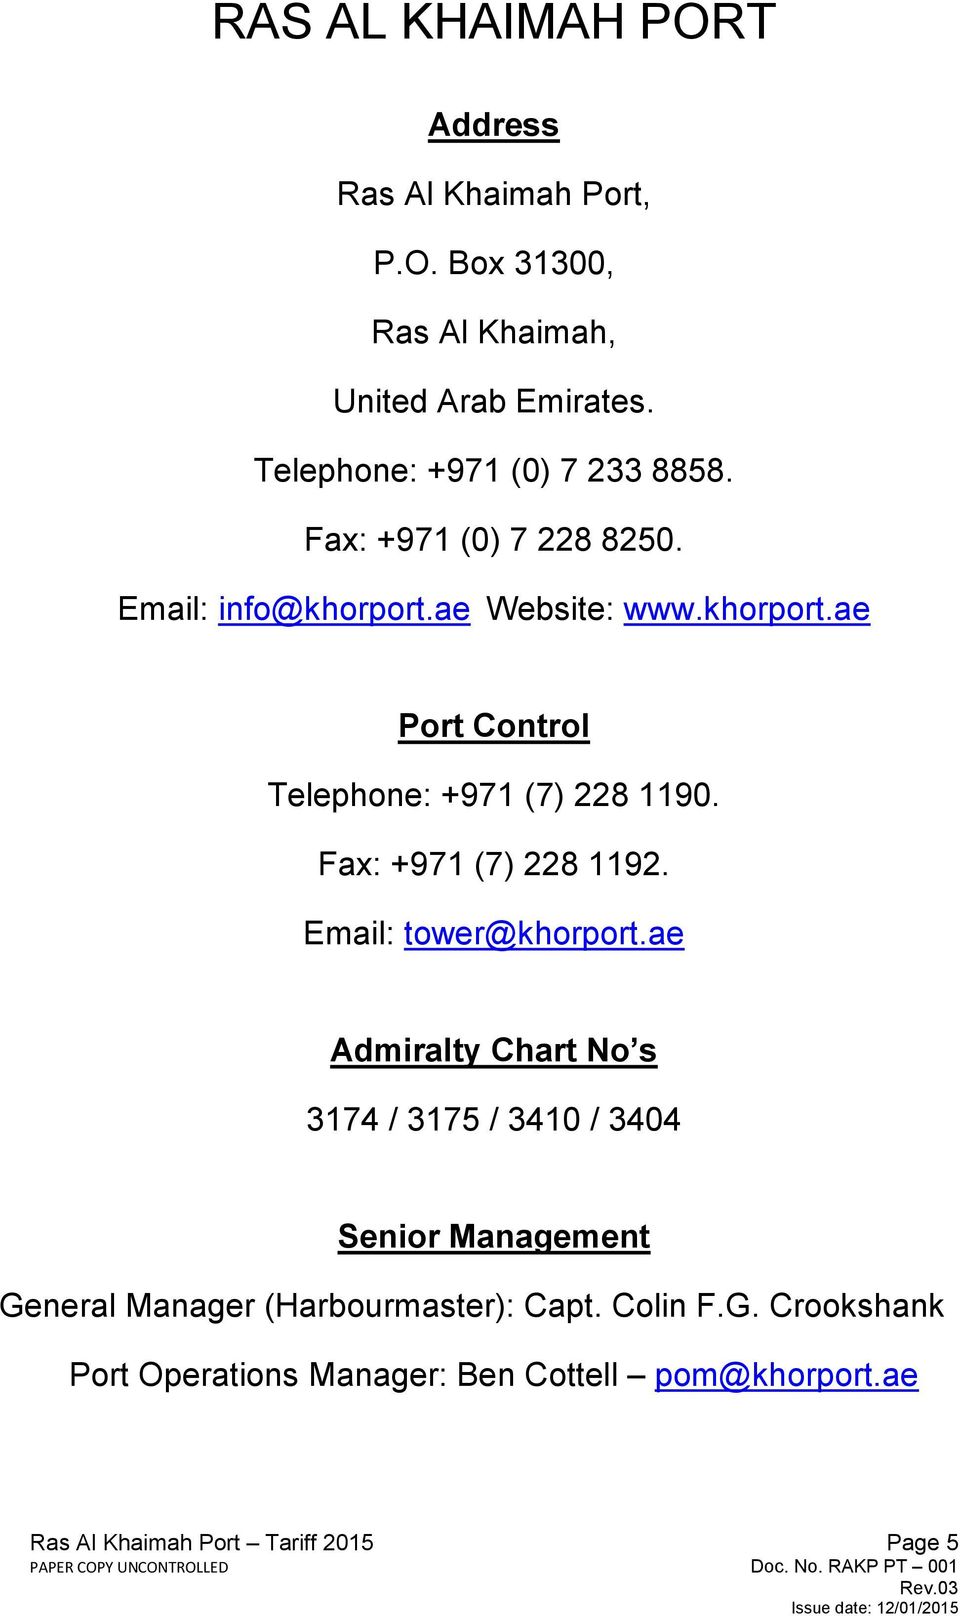 Fax: +971 (7) 228 1192. Email: tower@khorport.